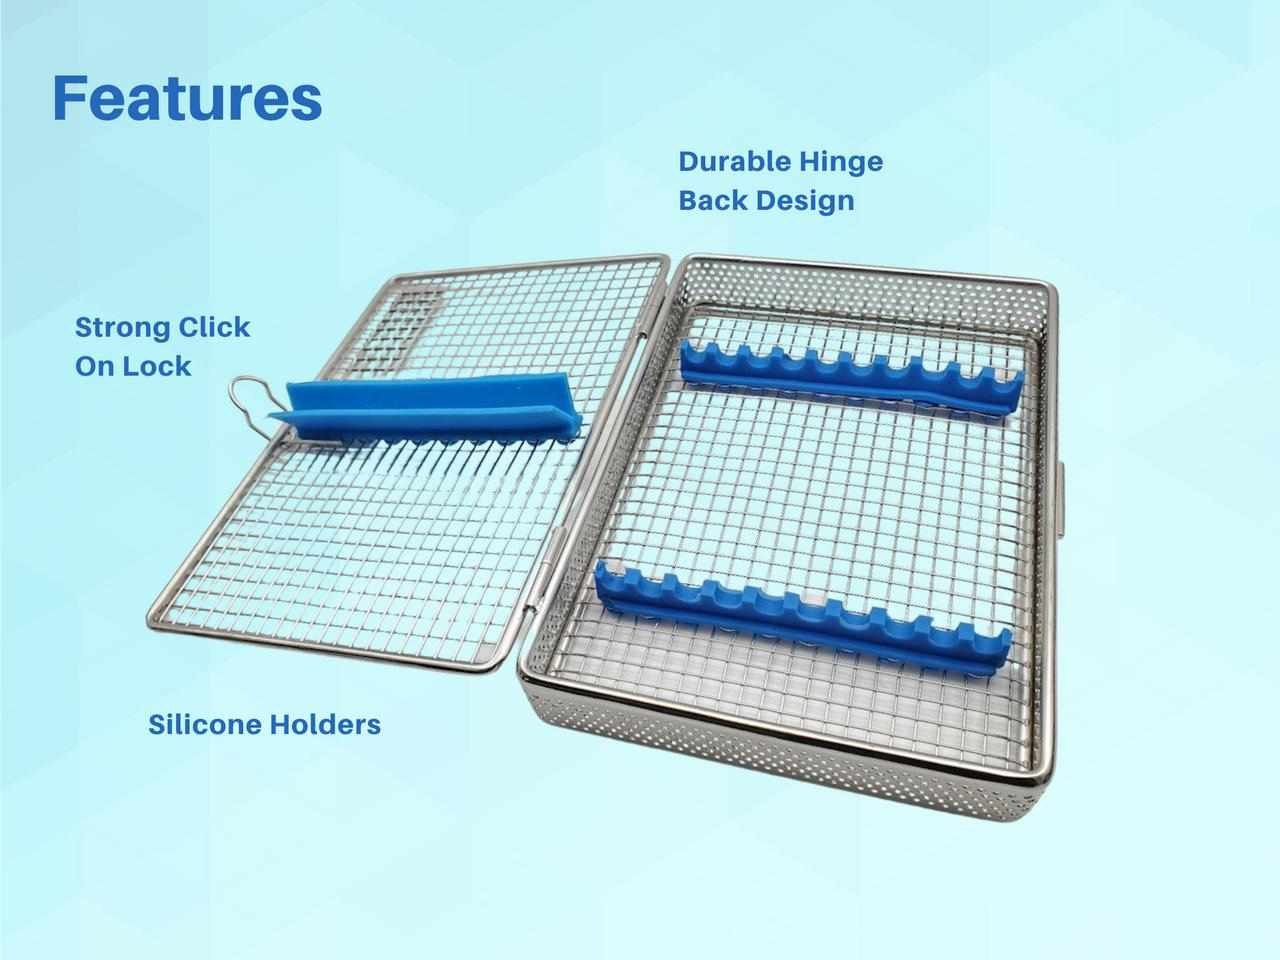 Mesh Cassette Tray Box for Thick Instruments Tubes Handpieces Dental Instruments Labs Organizer Autoclave Sterilization Up to 5 Instruments